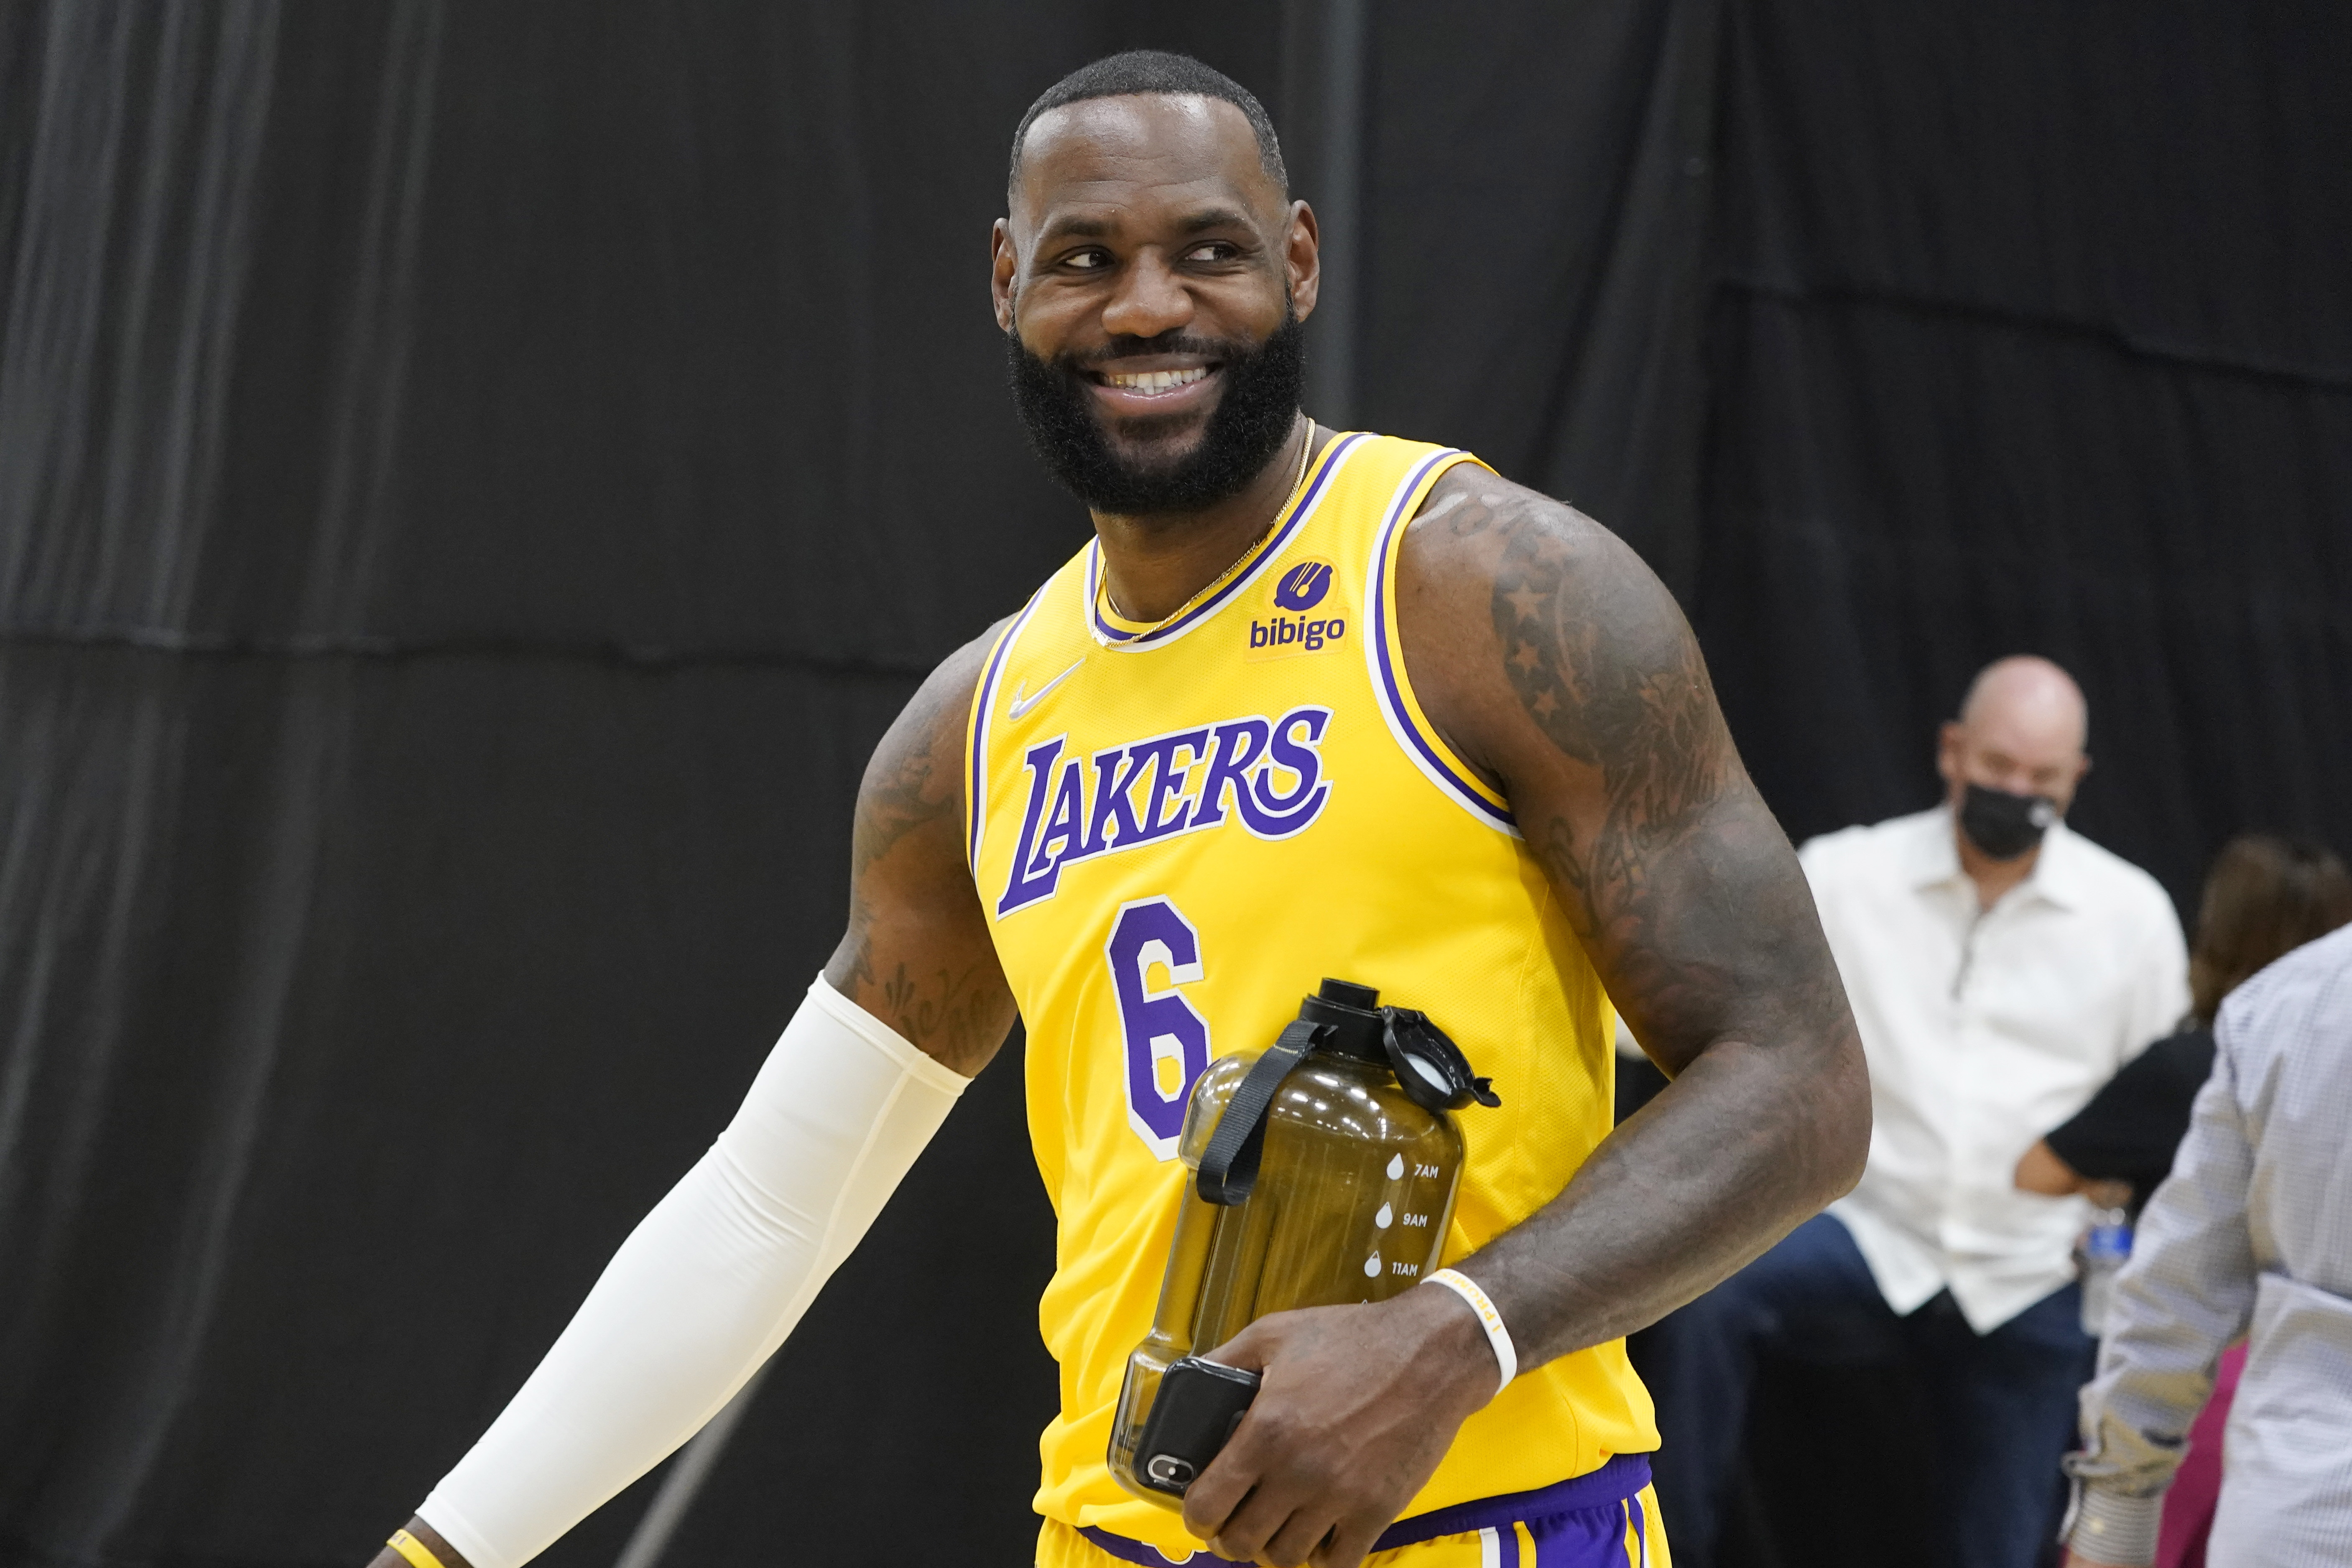 Los Angeles Lakers 2021 Media Day highlights - BLEACHERS NEWS